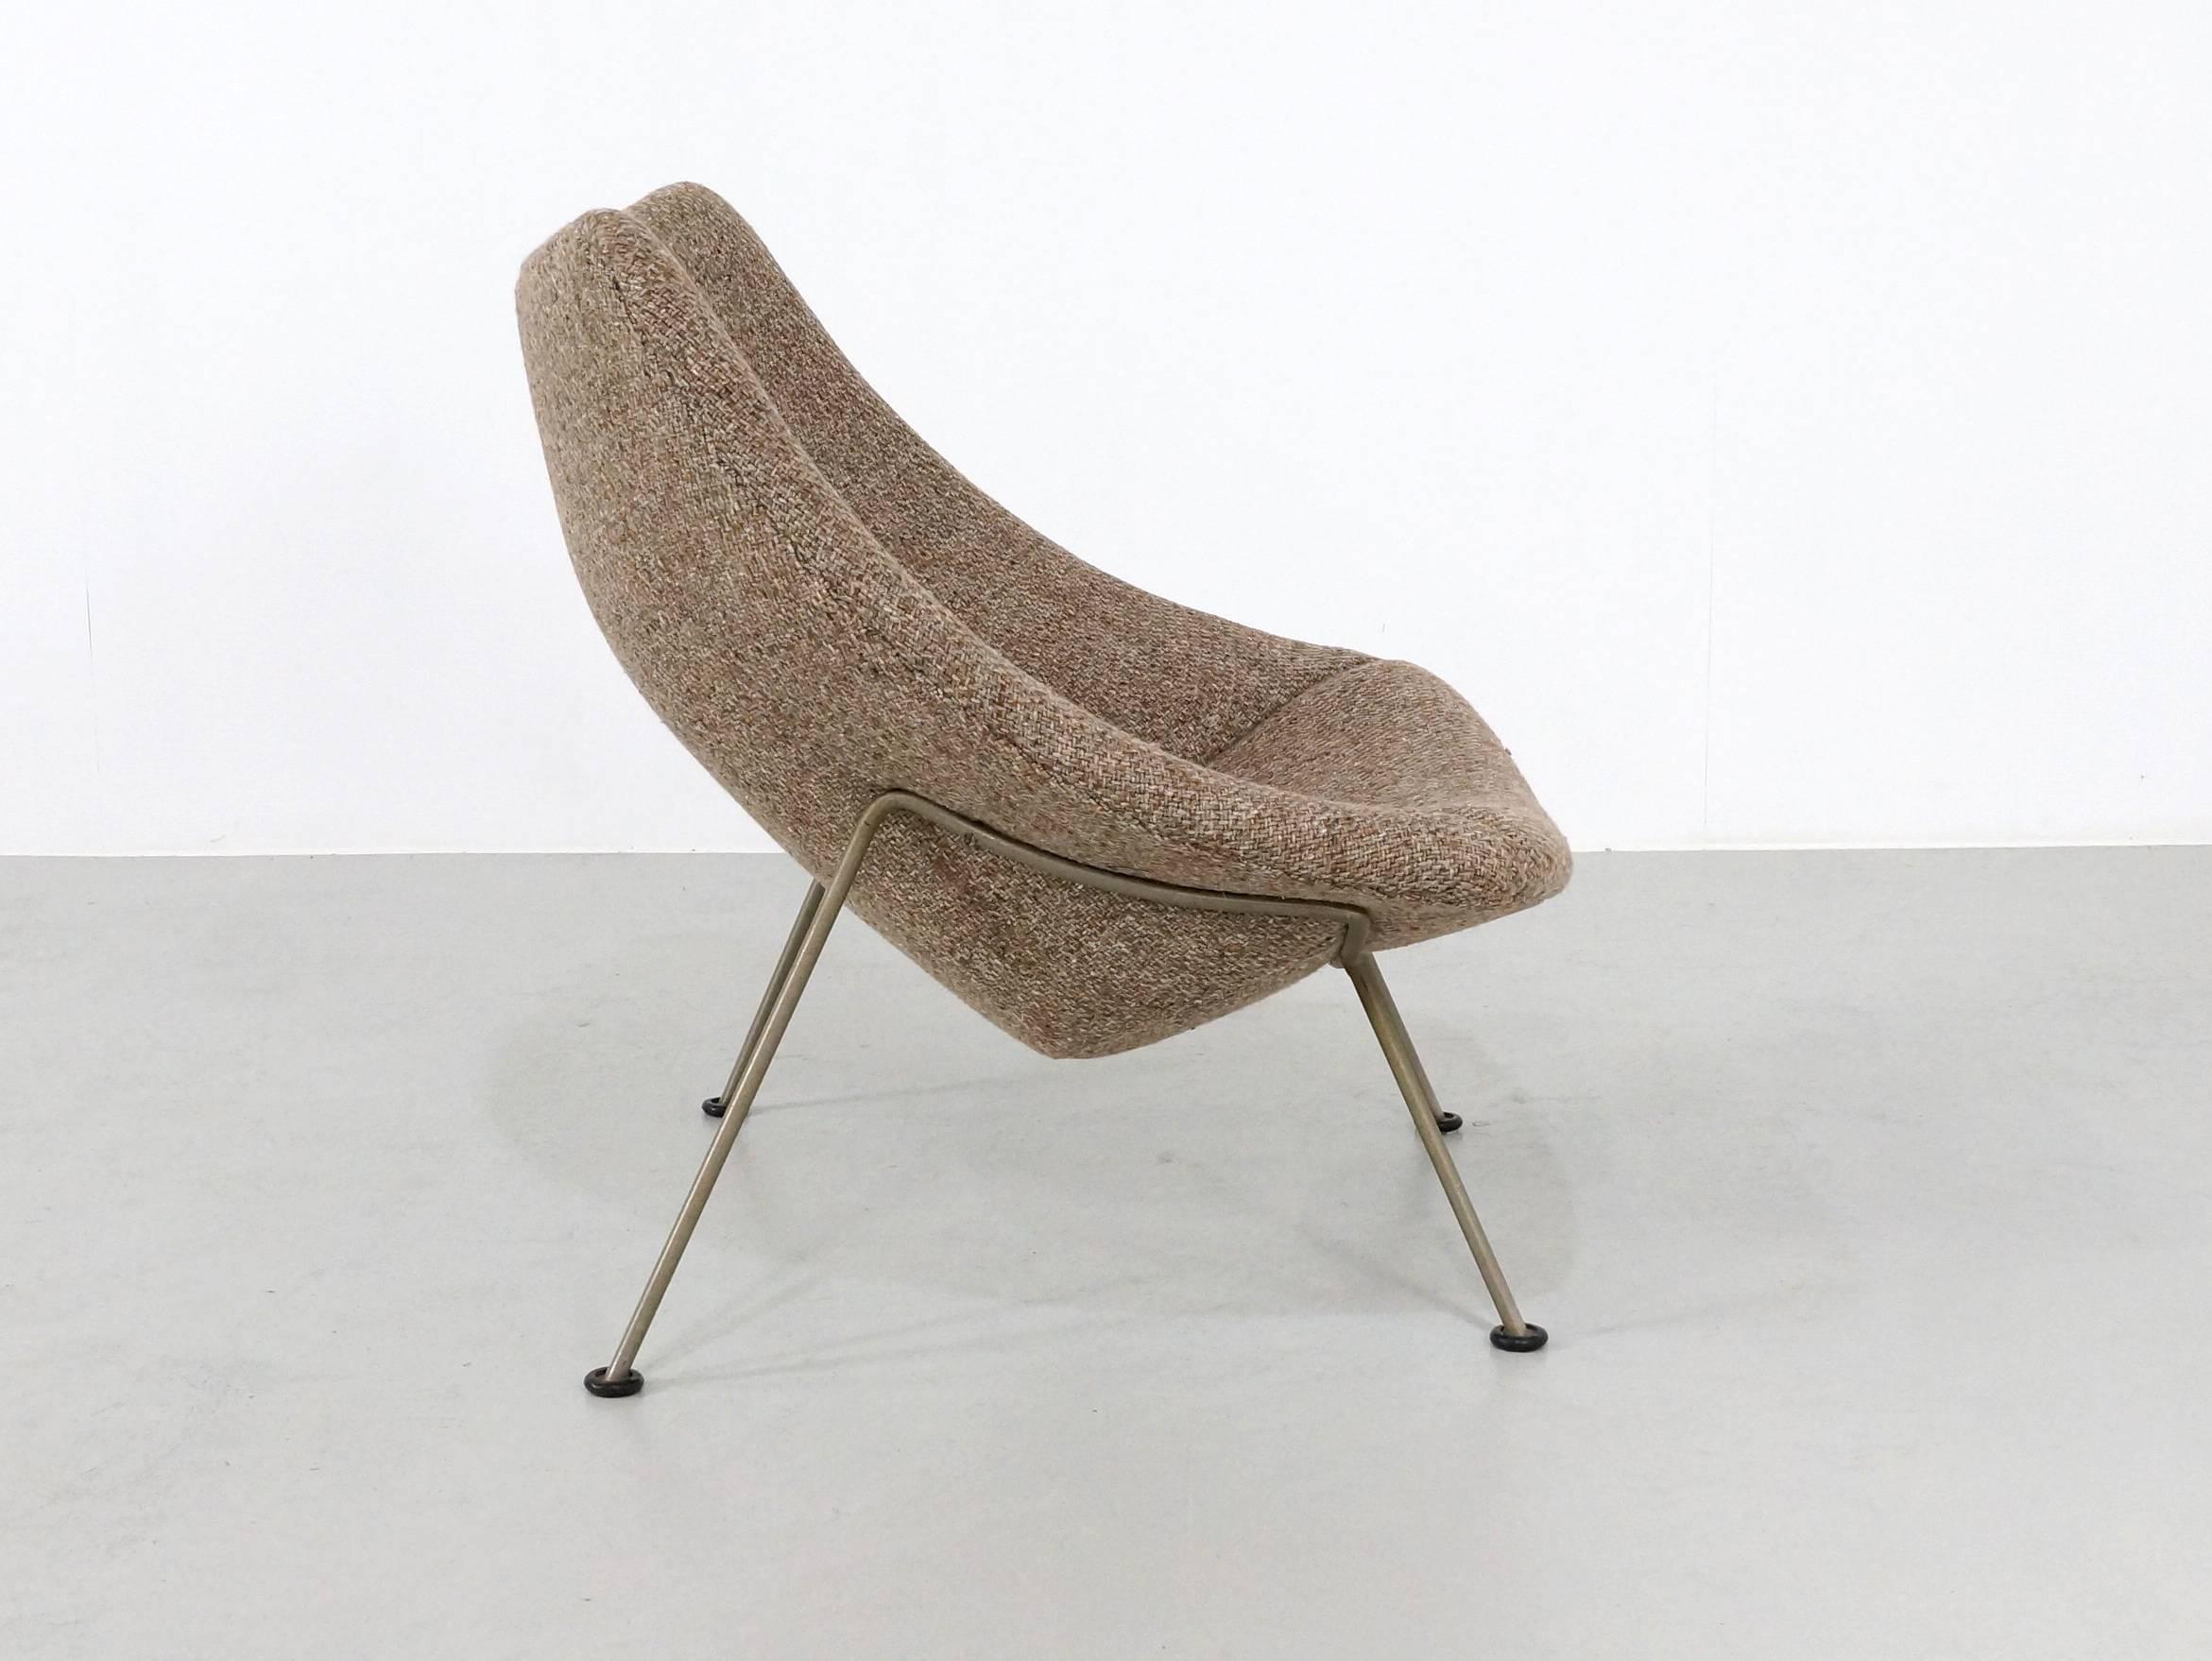 This Oyster chair designed by Pierre Paulin in the start of the 1960s has a nickel metal base and its design is so Minimalist that the wool upholstered wooden seating shell seems to float.
The wool upholstery with the typical 1960 brown grey color